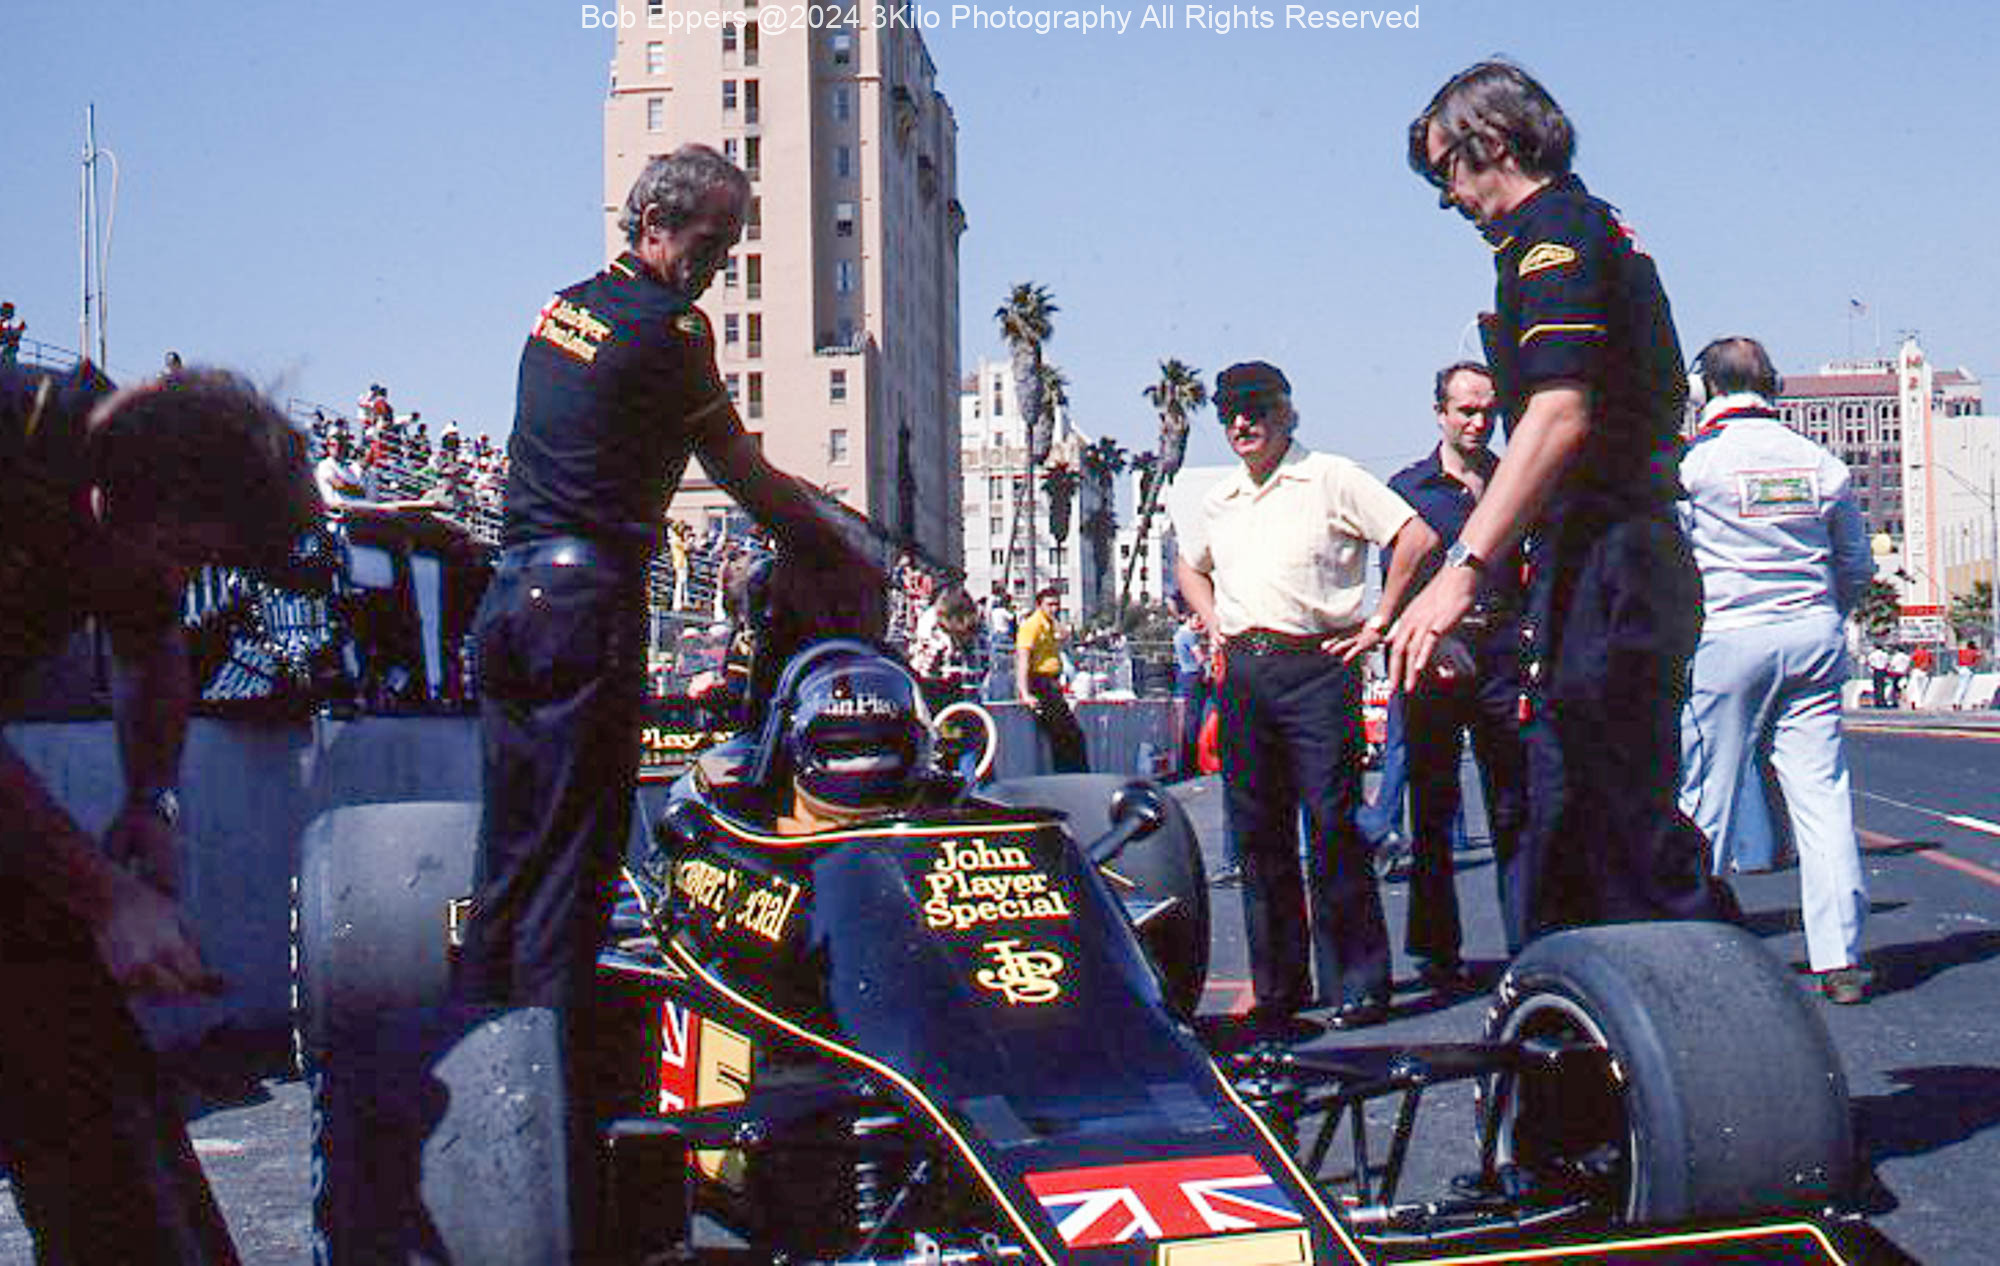 Photo of F1 Lotus in the pit lane,  Colin Chapman is at the rear wearing a hat.  1976